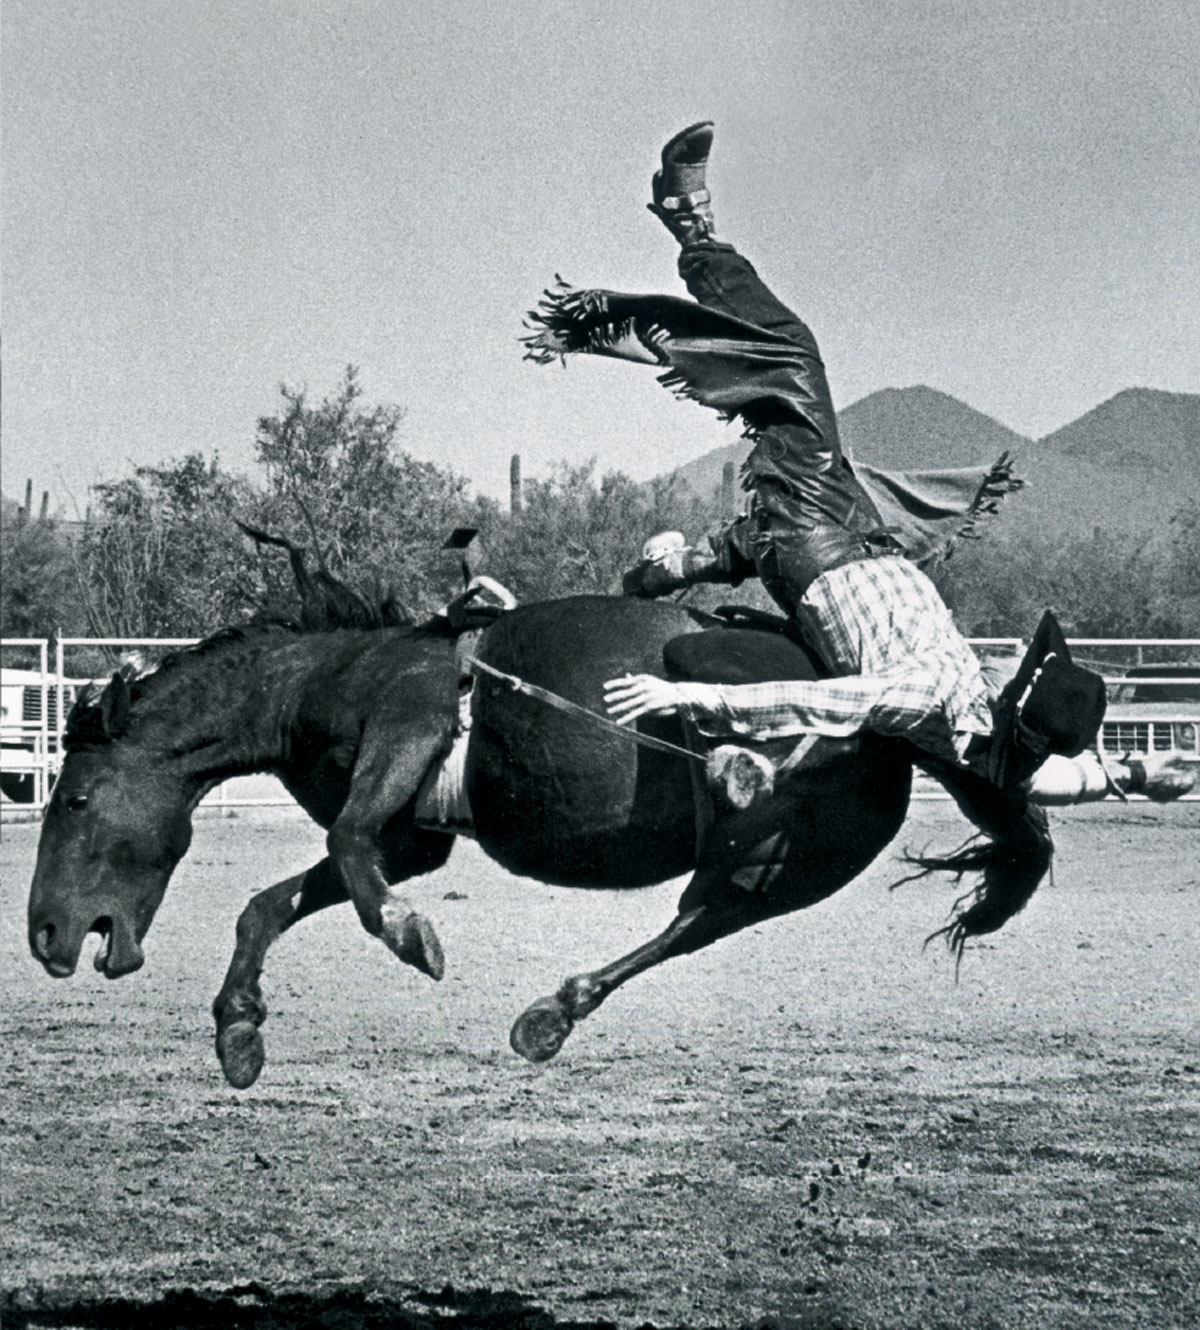 Photograph of Dennis Mann riding the horse named “Soldier,” Cave Creek, Arizona, 1983.